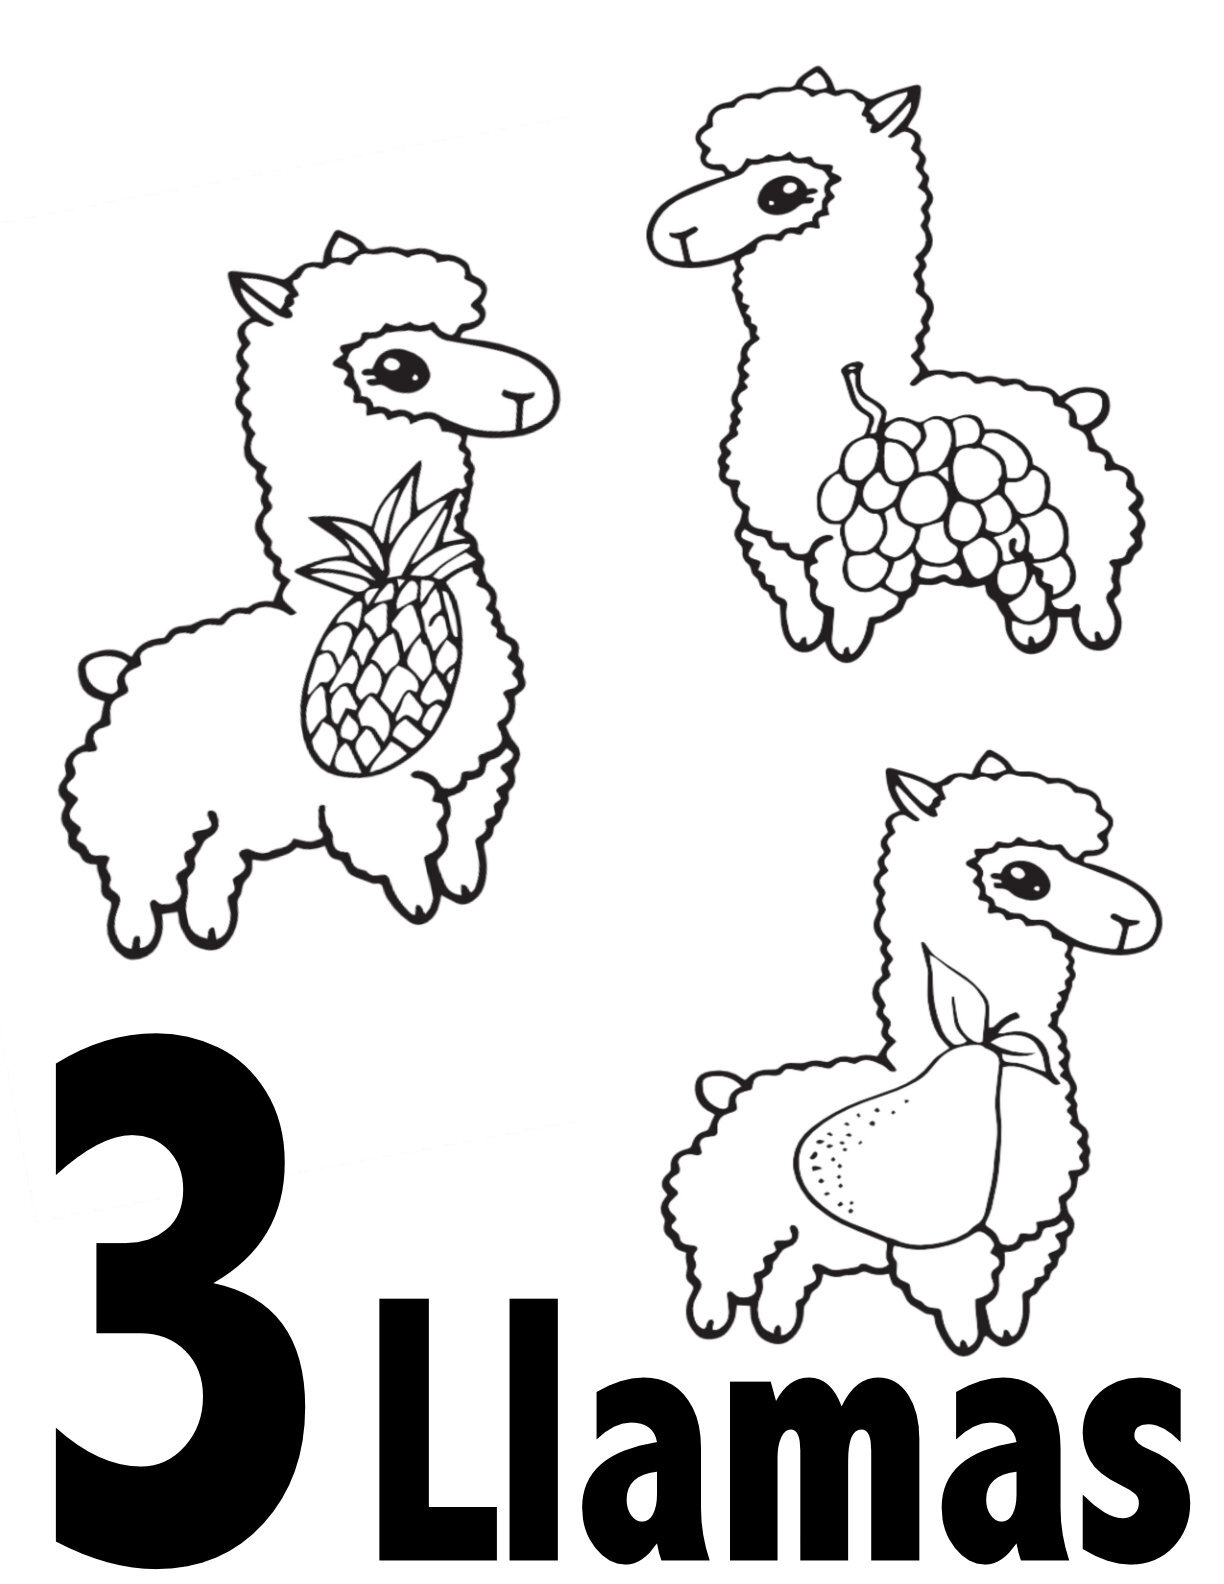 Llama Number Coloring Pages Collection 1-10 - Free Preschool/Kindergarten Printable - Number 3CLICK TO DOWNLOAD THE 3 LLAMA PAGE ONLY